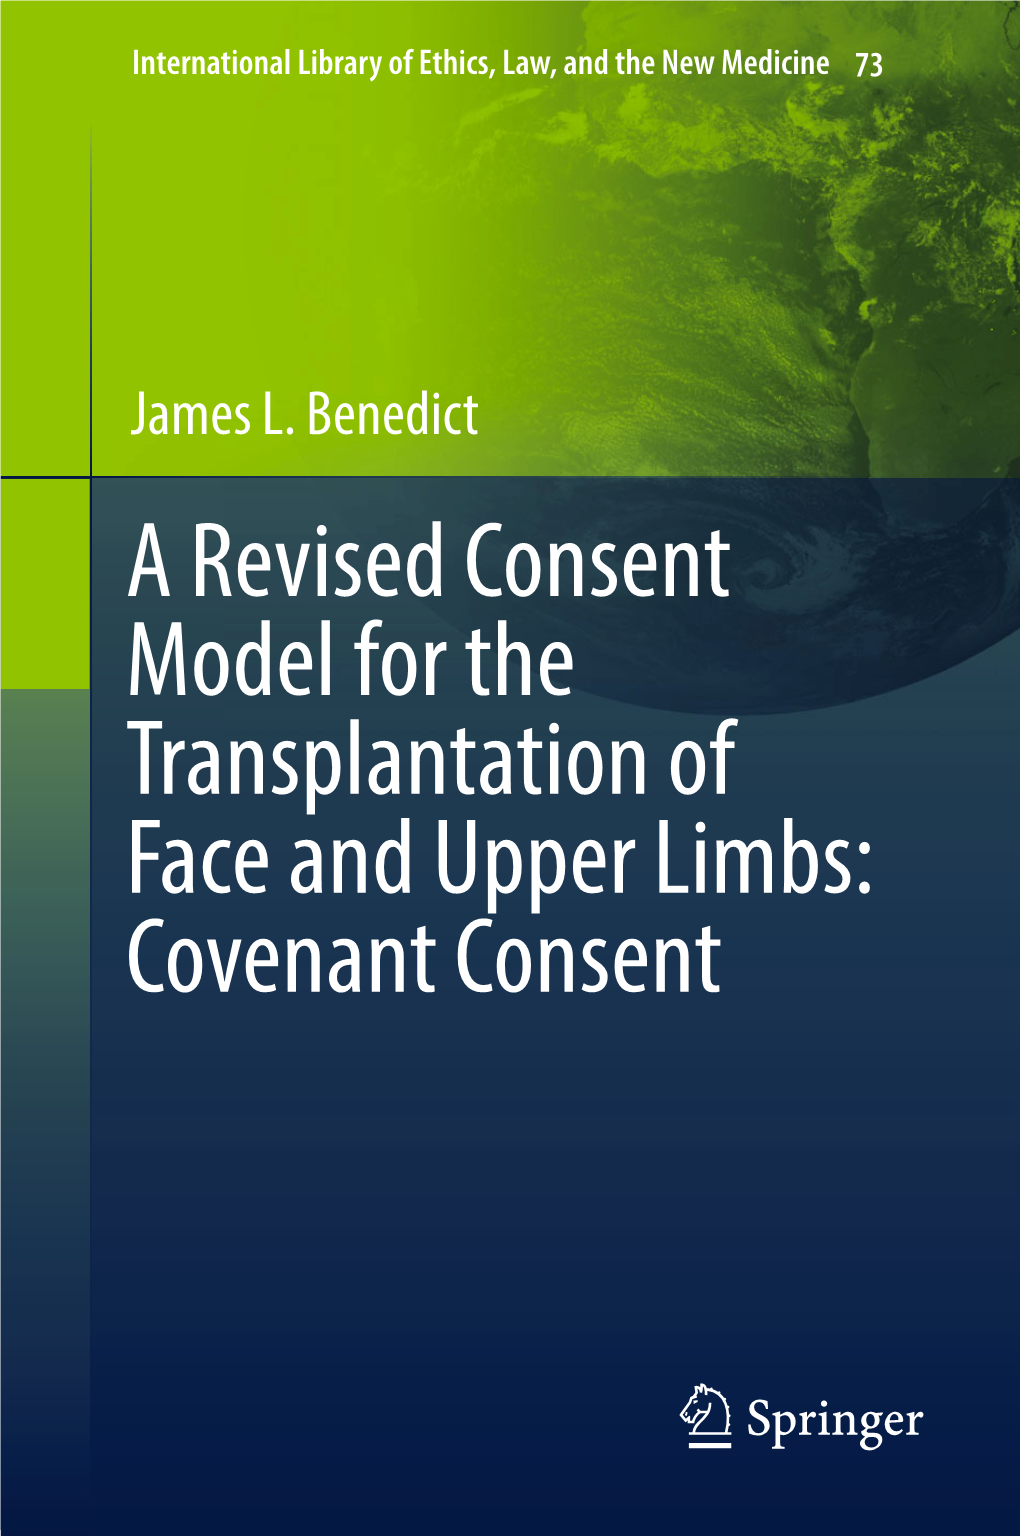 James L. Benedict a Revised Consent Model for the Transplantation of Face and Upper Limbs: Covenant Consent International Library of Ethics, Law, and the New Medicine